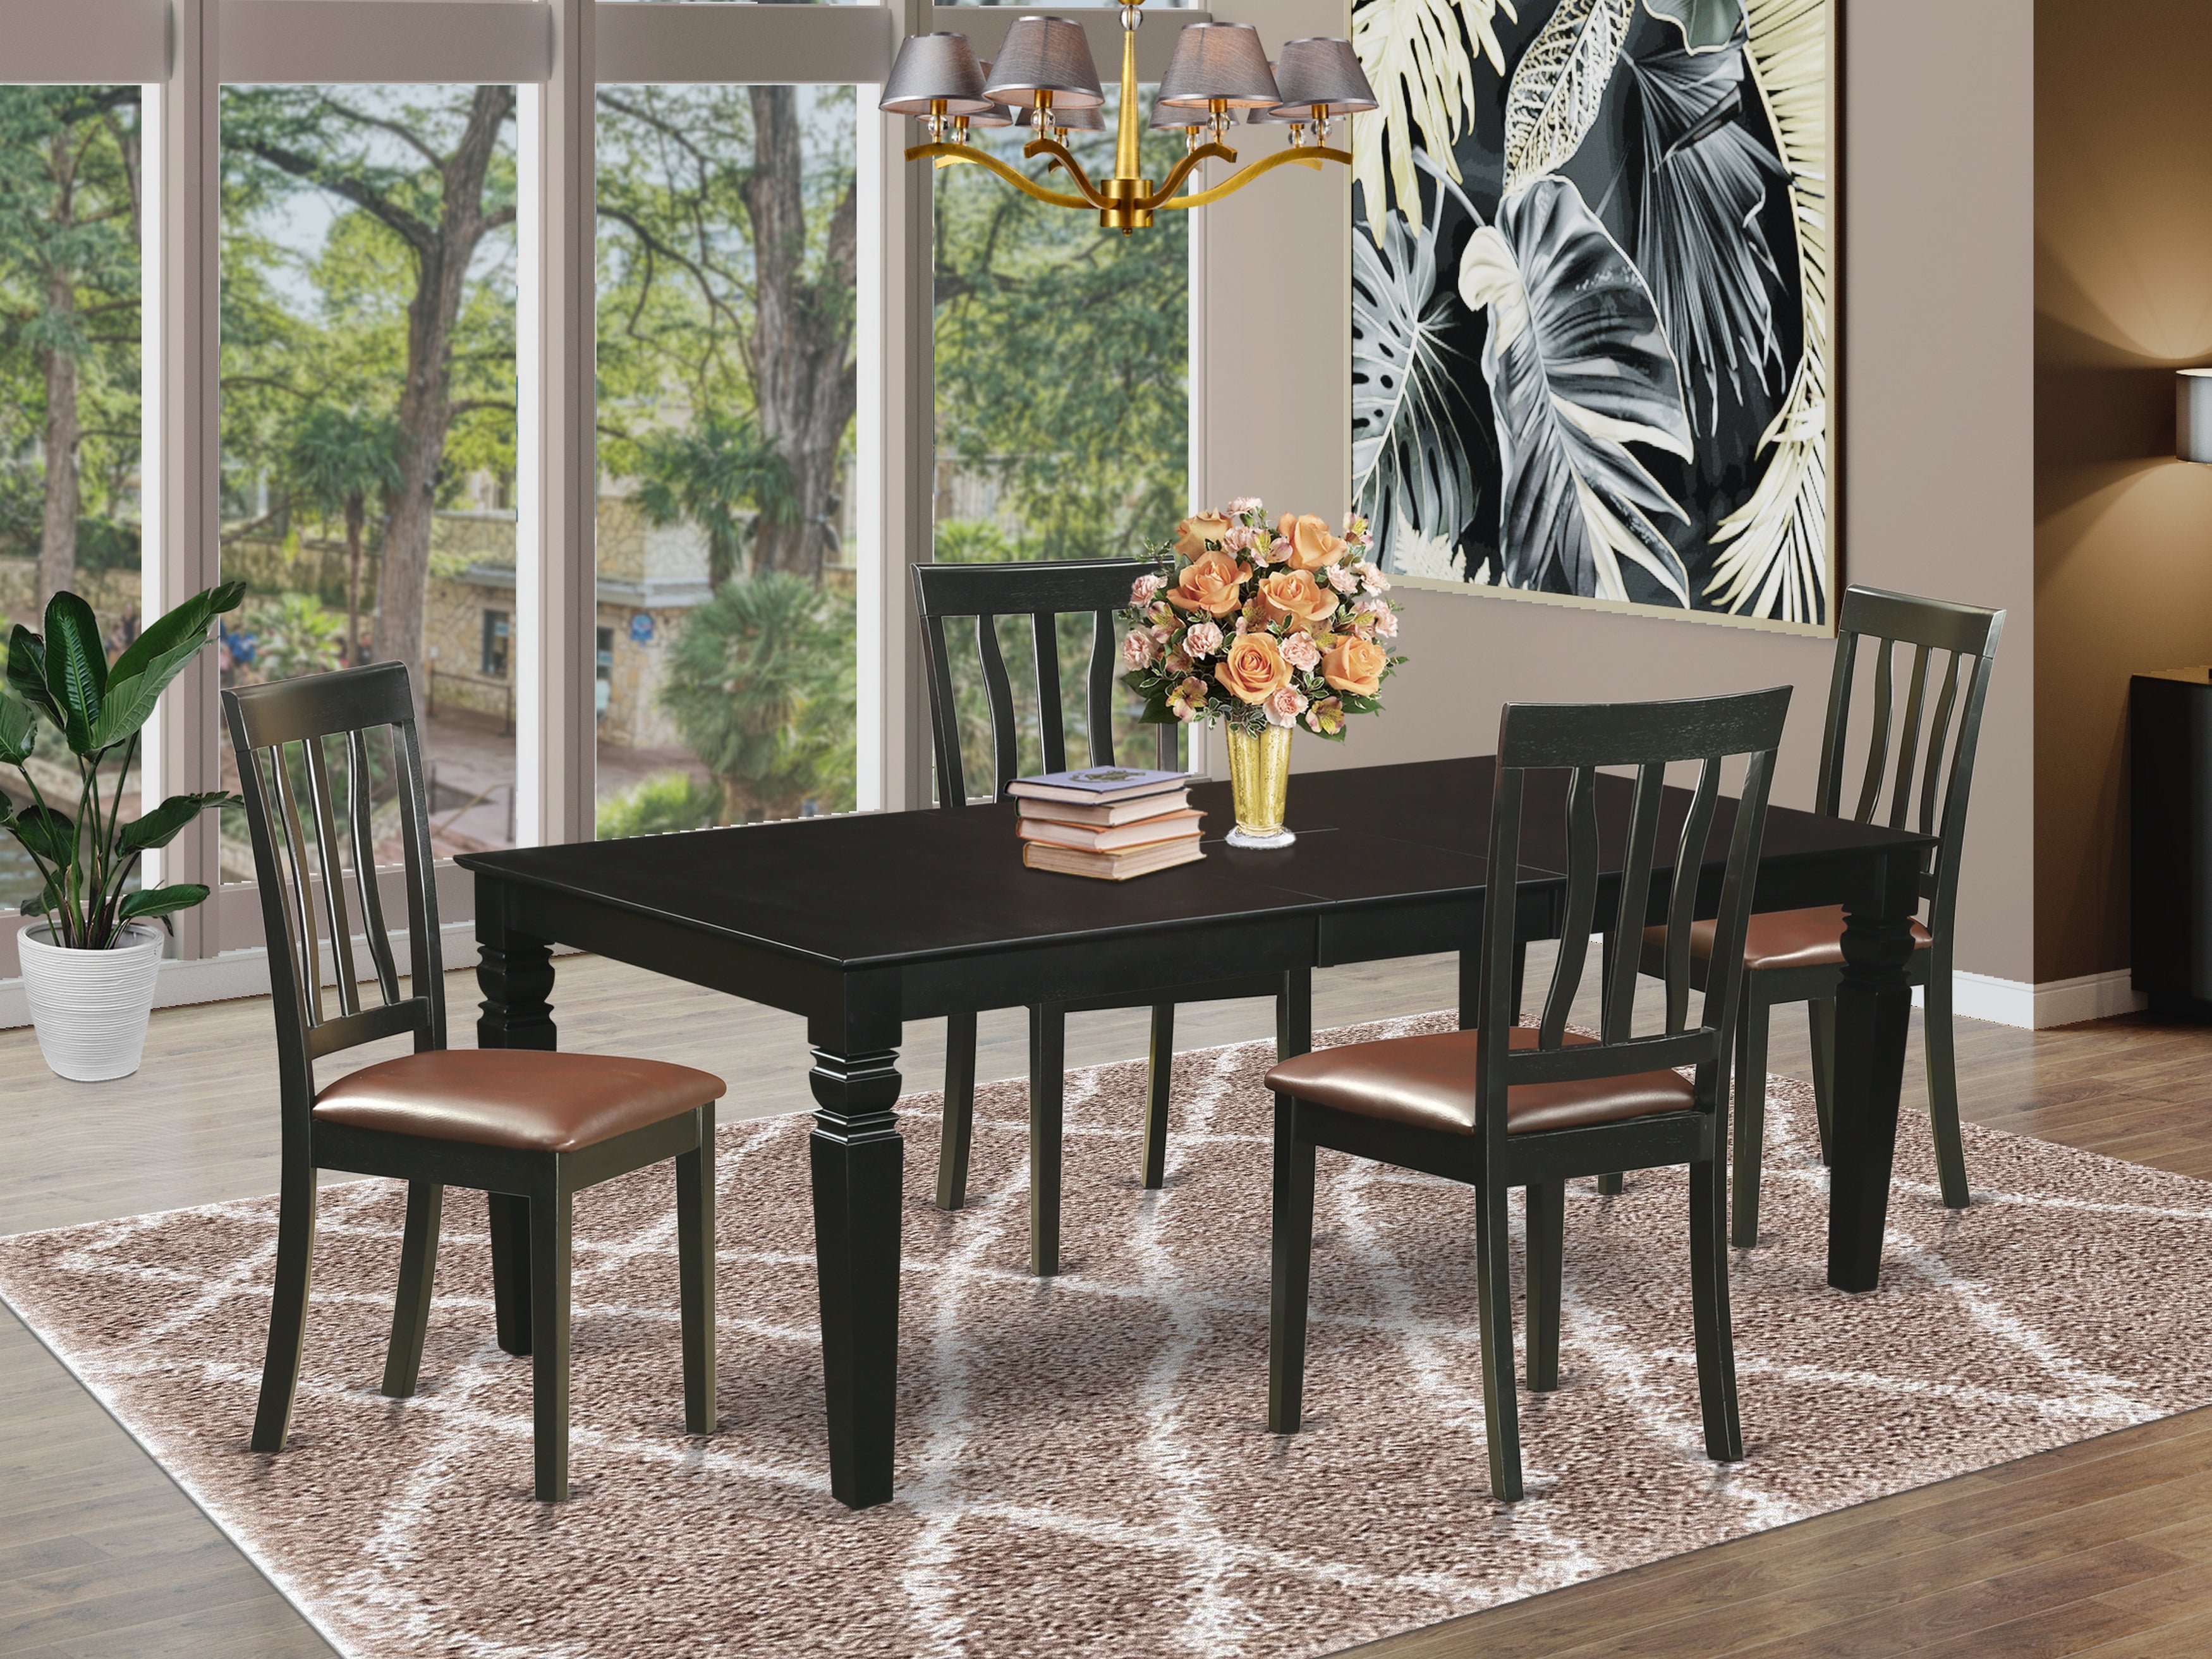 LGAN5-BLK-LC 5 Pc Kitchen table set with a Kitchen Table and 4 Leather Dining Chairs in Black